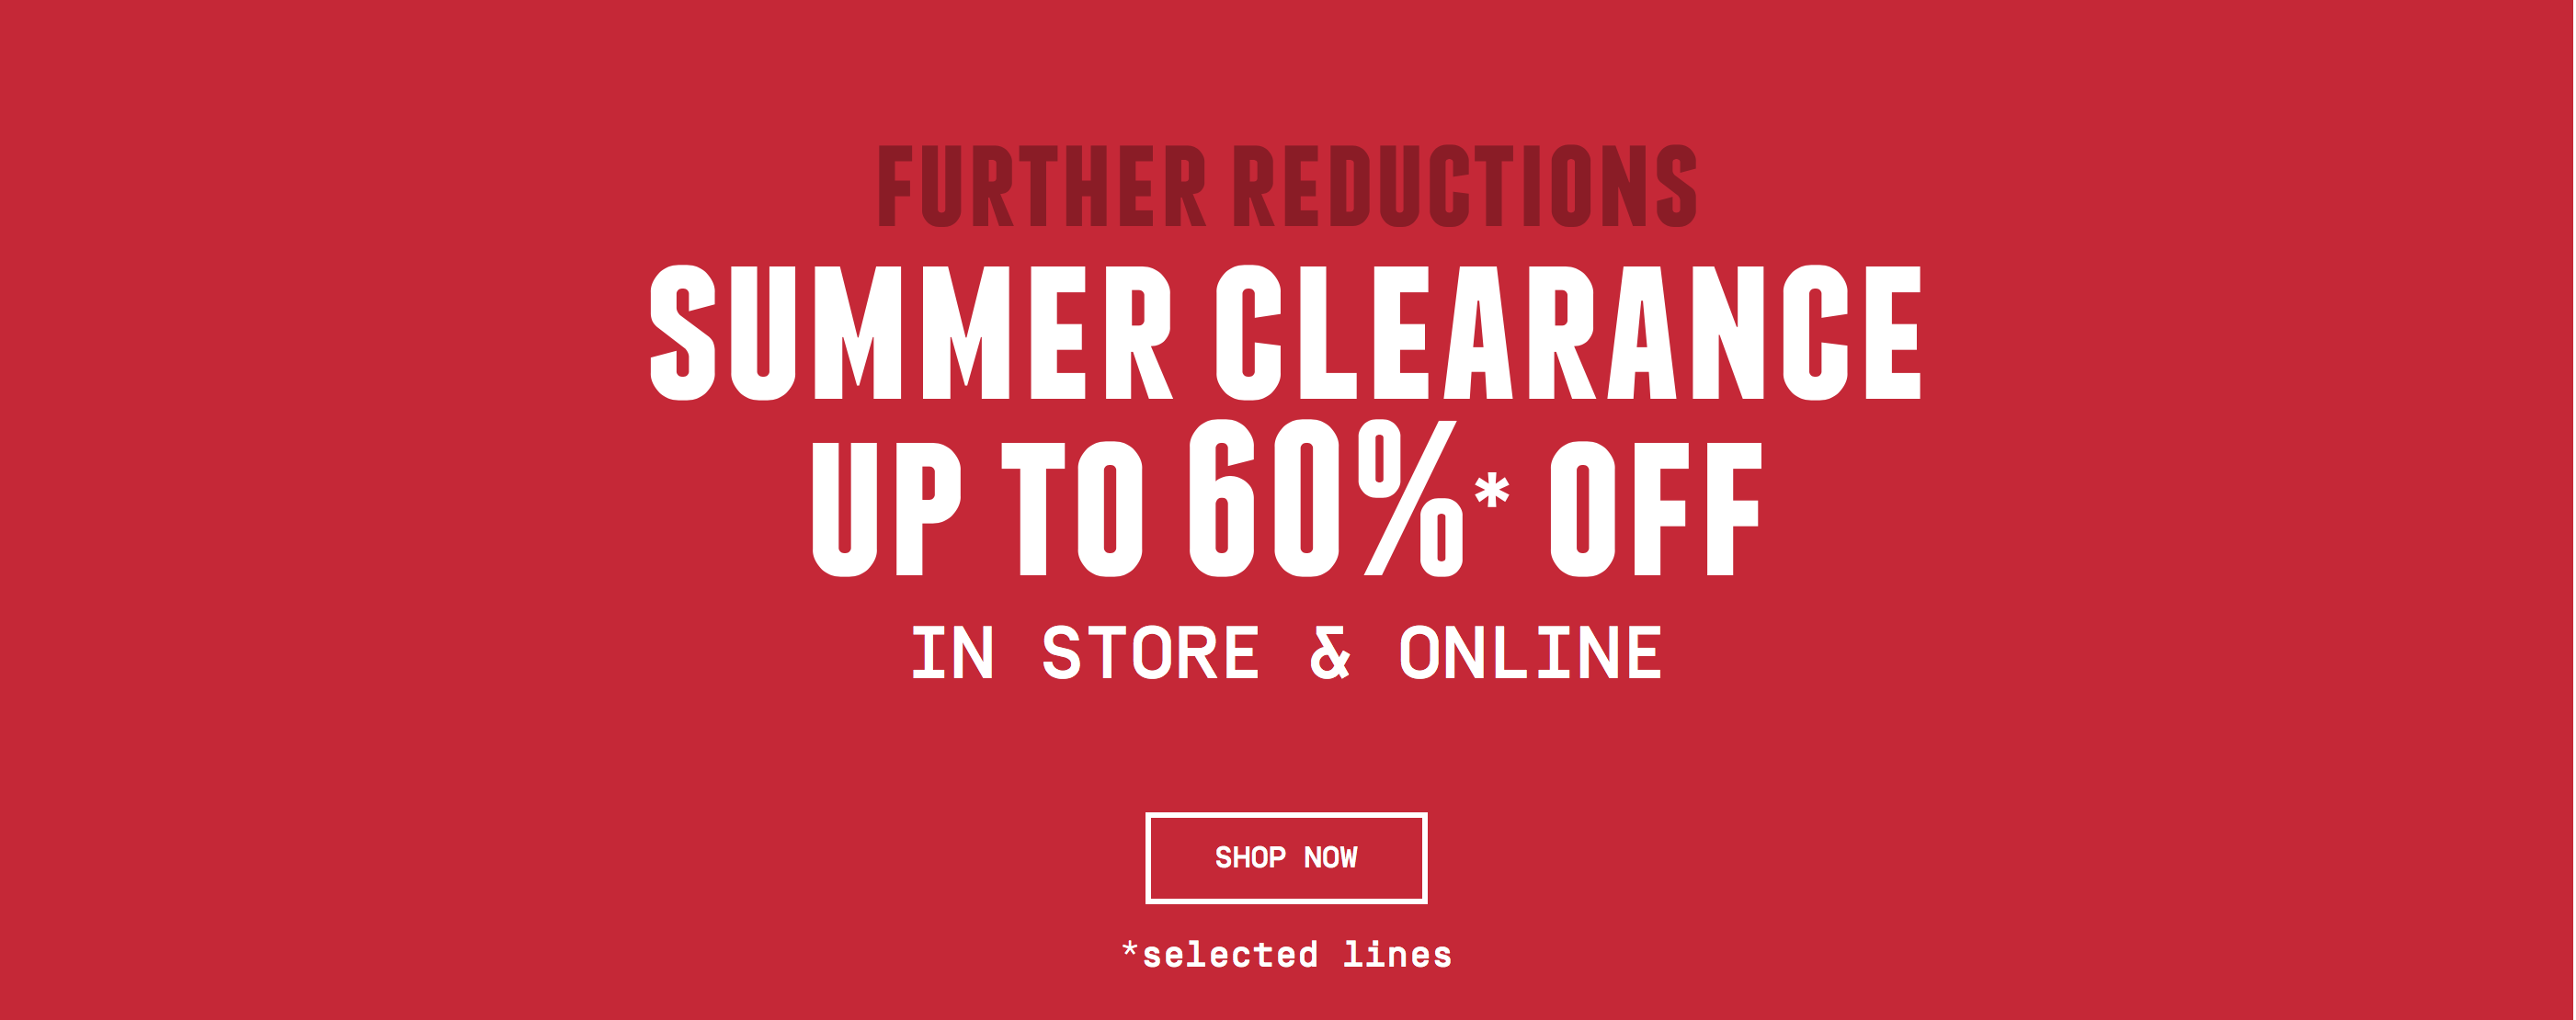 Jacamo: Summer Clearance up to 60% off selected lines